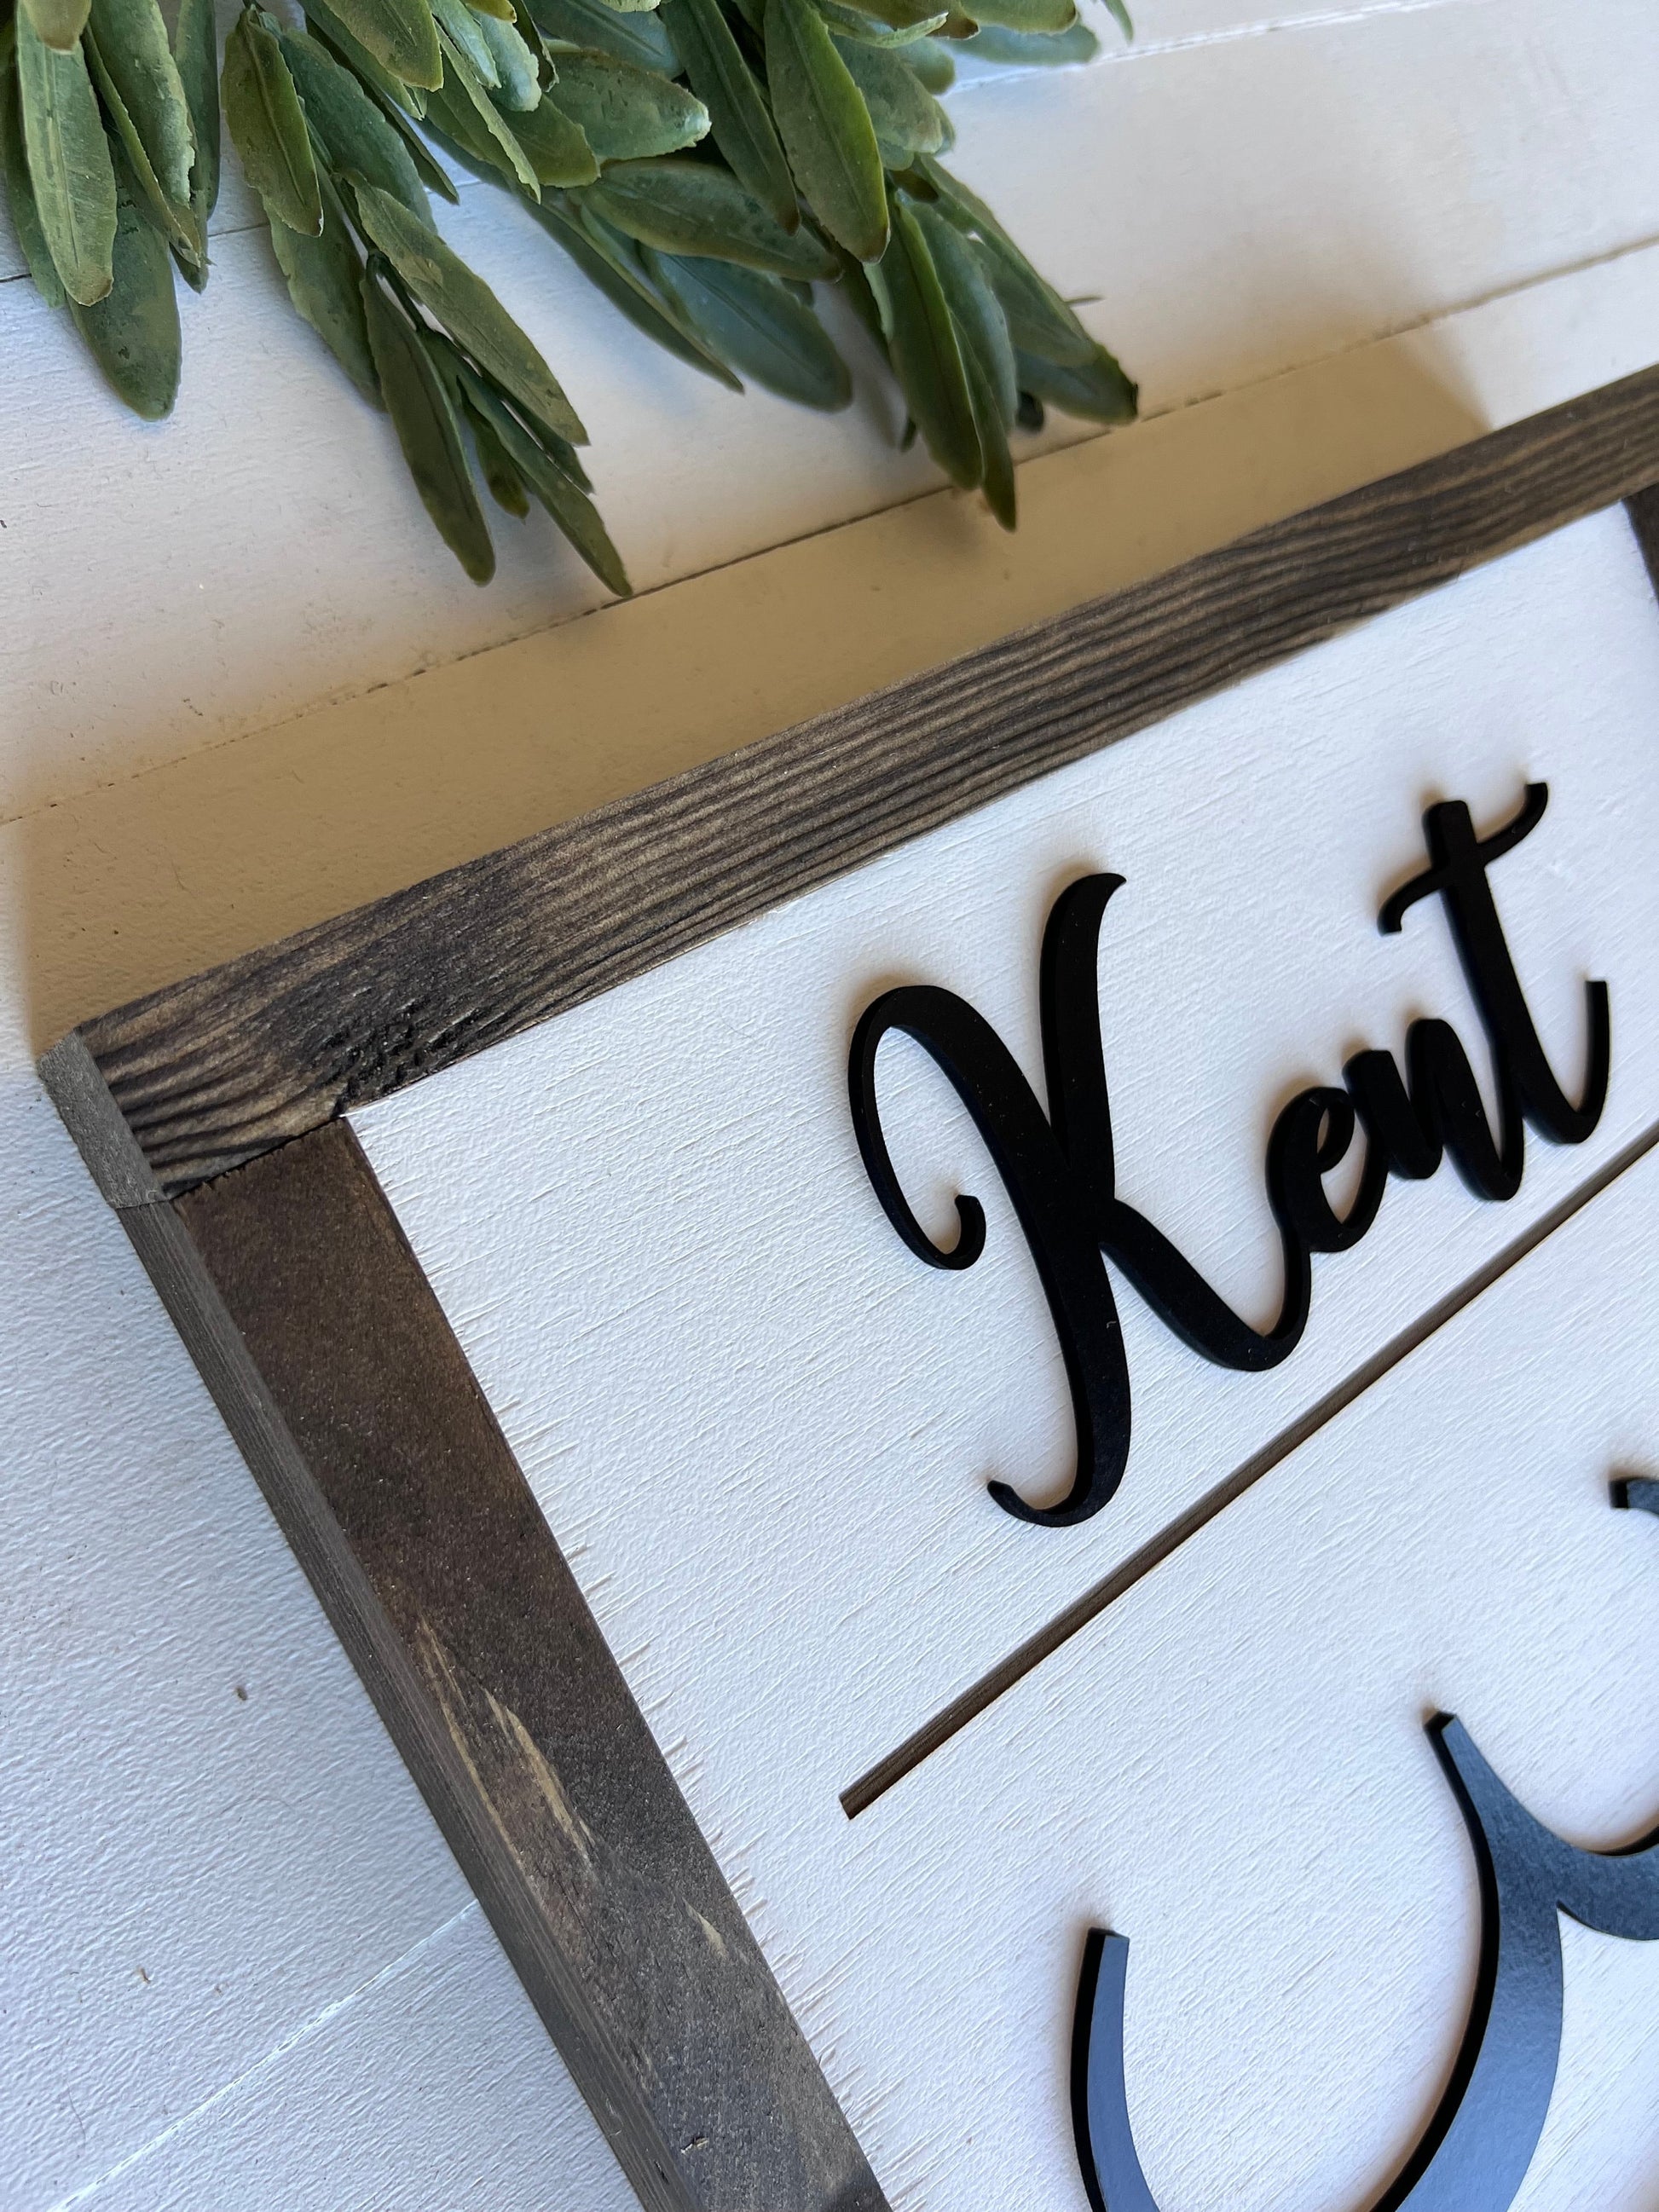 Custom Family Party of 4, 3, 5, 6 Wood Sign - Personalized Farmhouse Decor and Housewarming Gift with 3D and Engraved Lettering